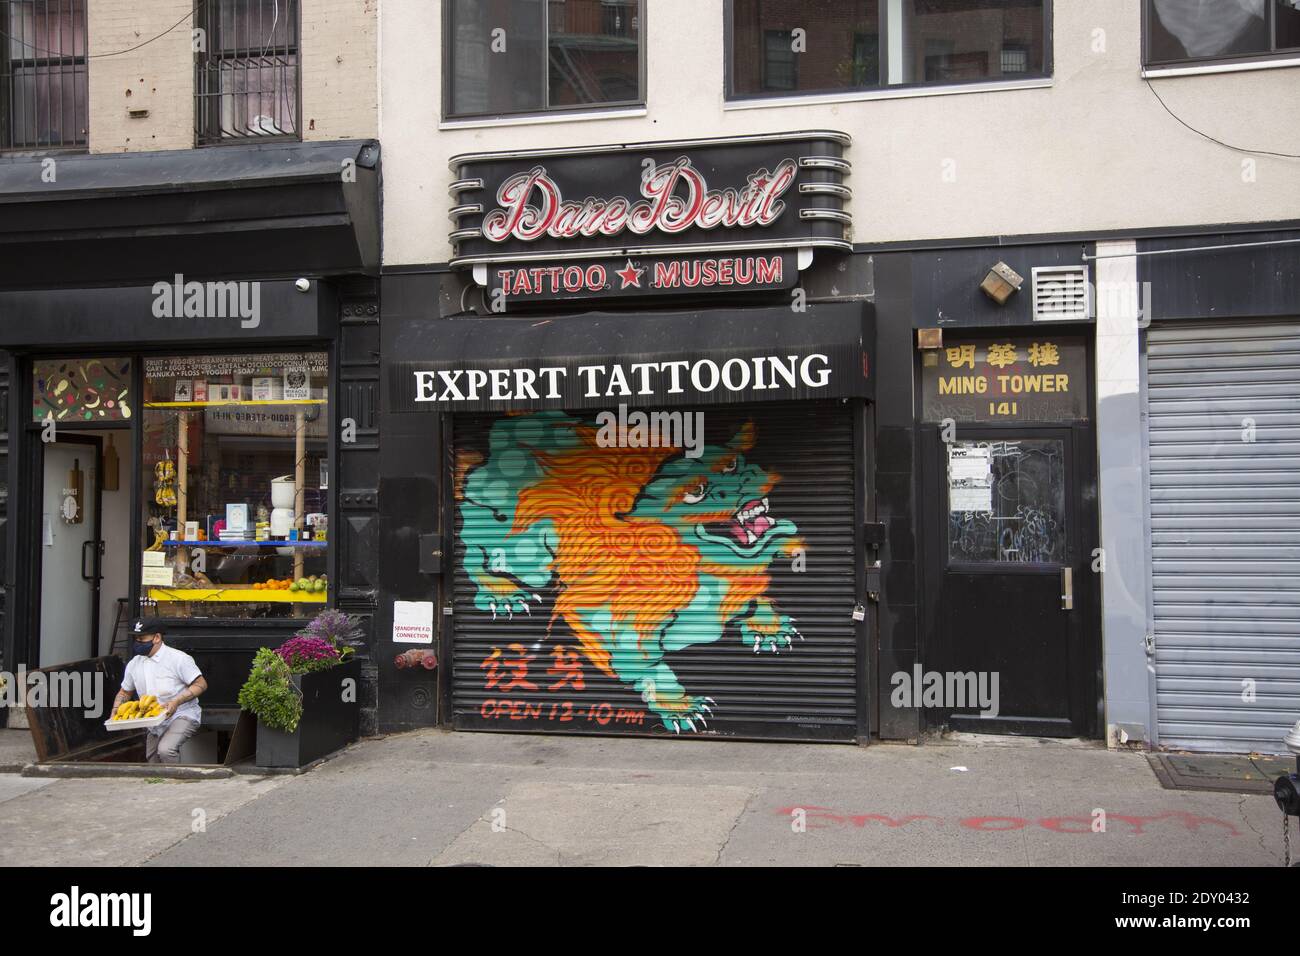 Dare Devil Tattoo Museum on Division Street in Chinatown, Lower East Side, Manhattan. Stock Photo